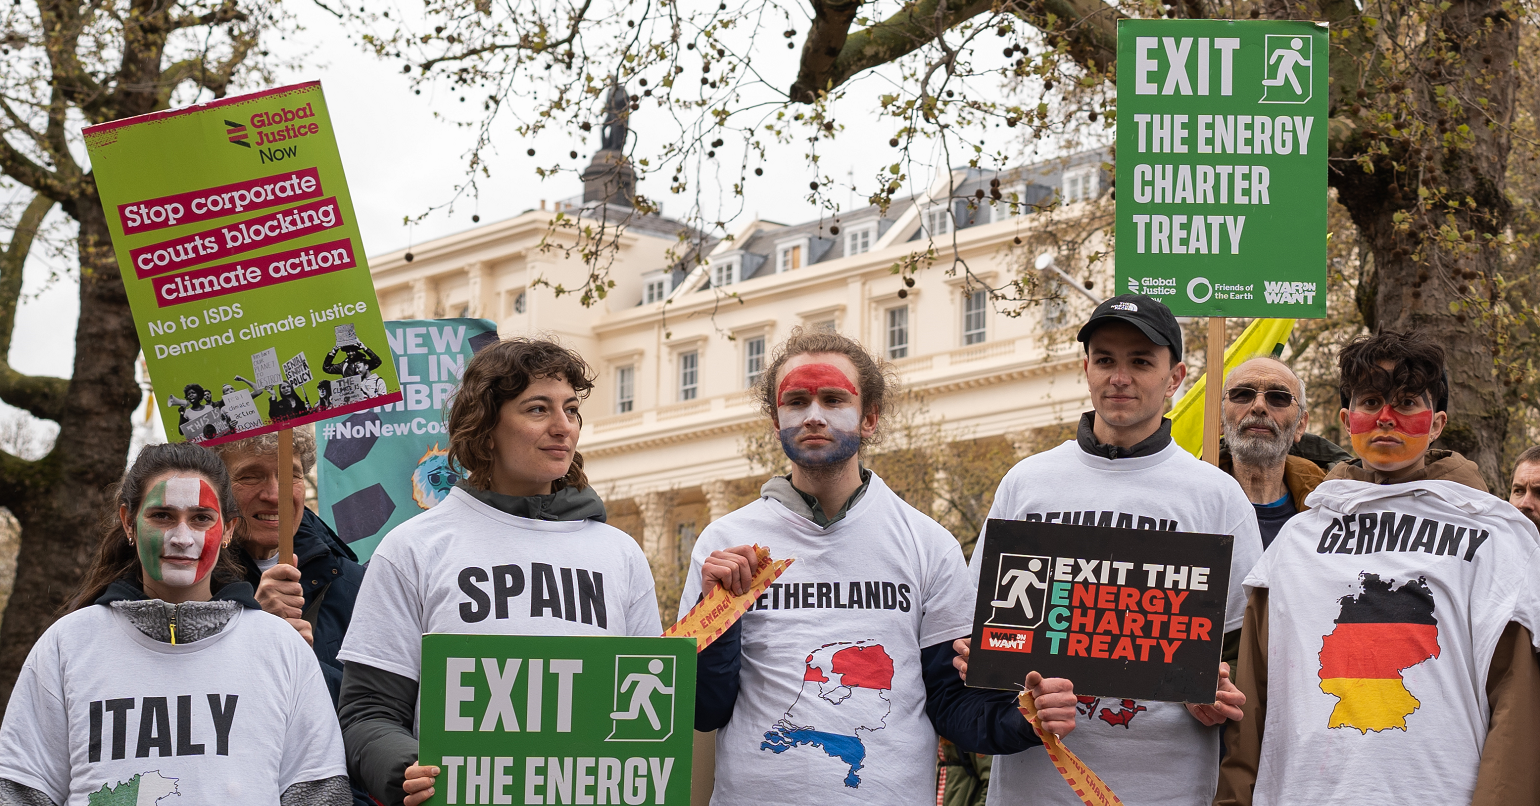 Campaigners protesting against the Energy Charter Treaty